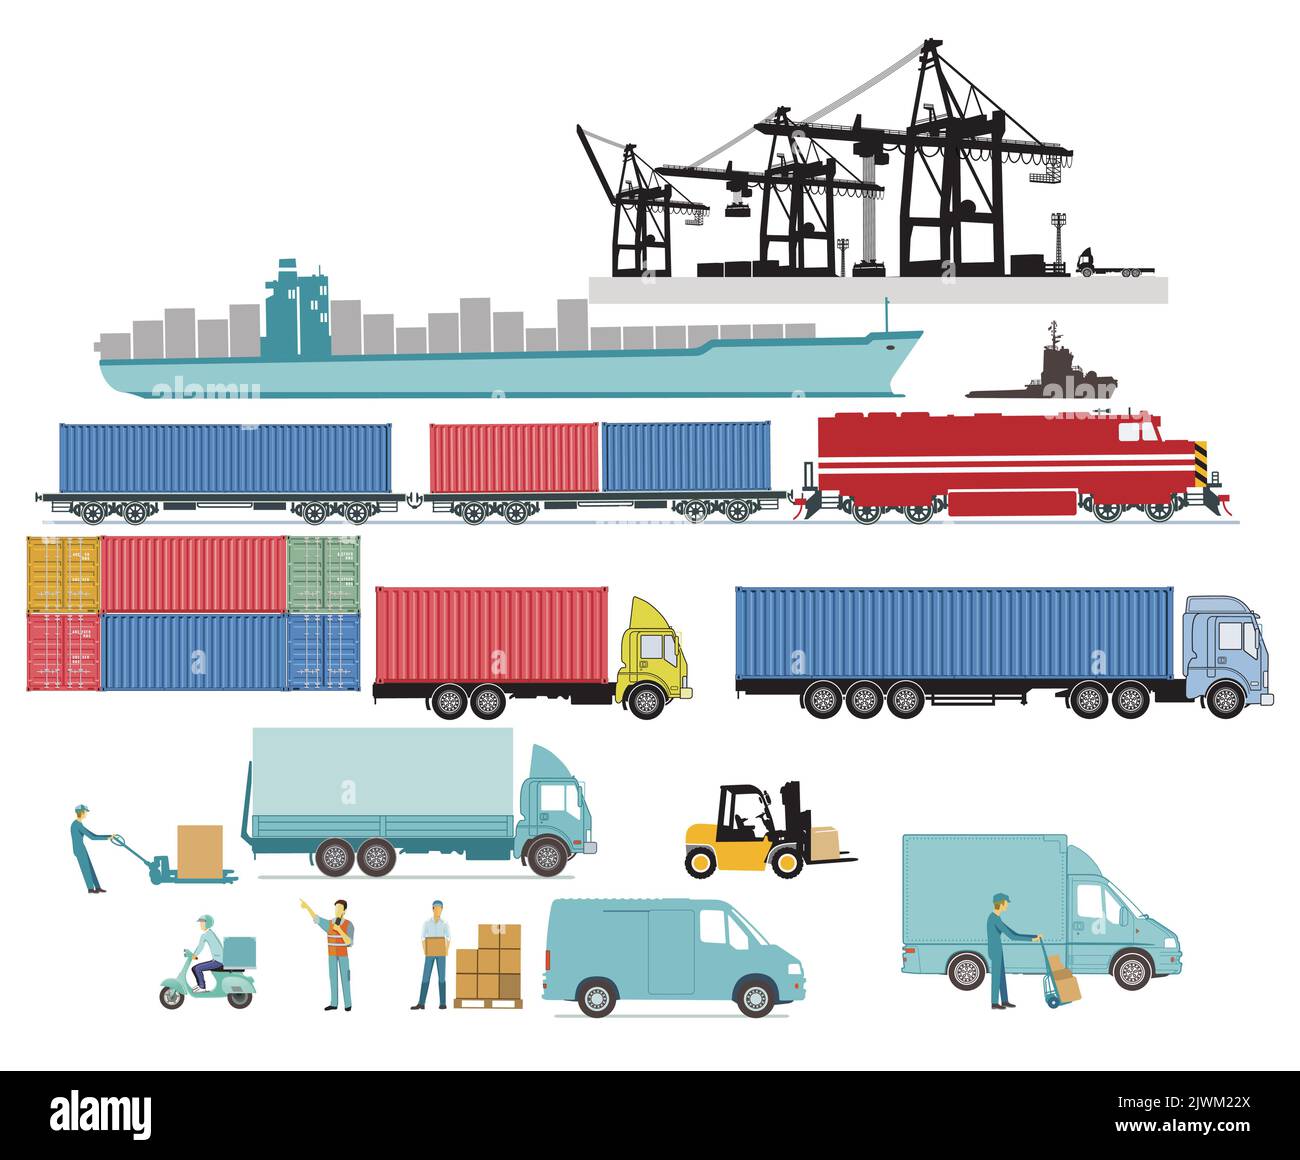 Logistic and shipping, container transportation, illustration Stock Vector